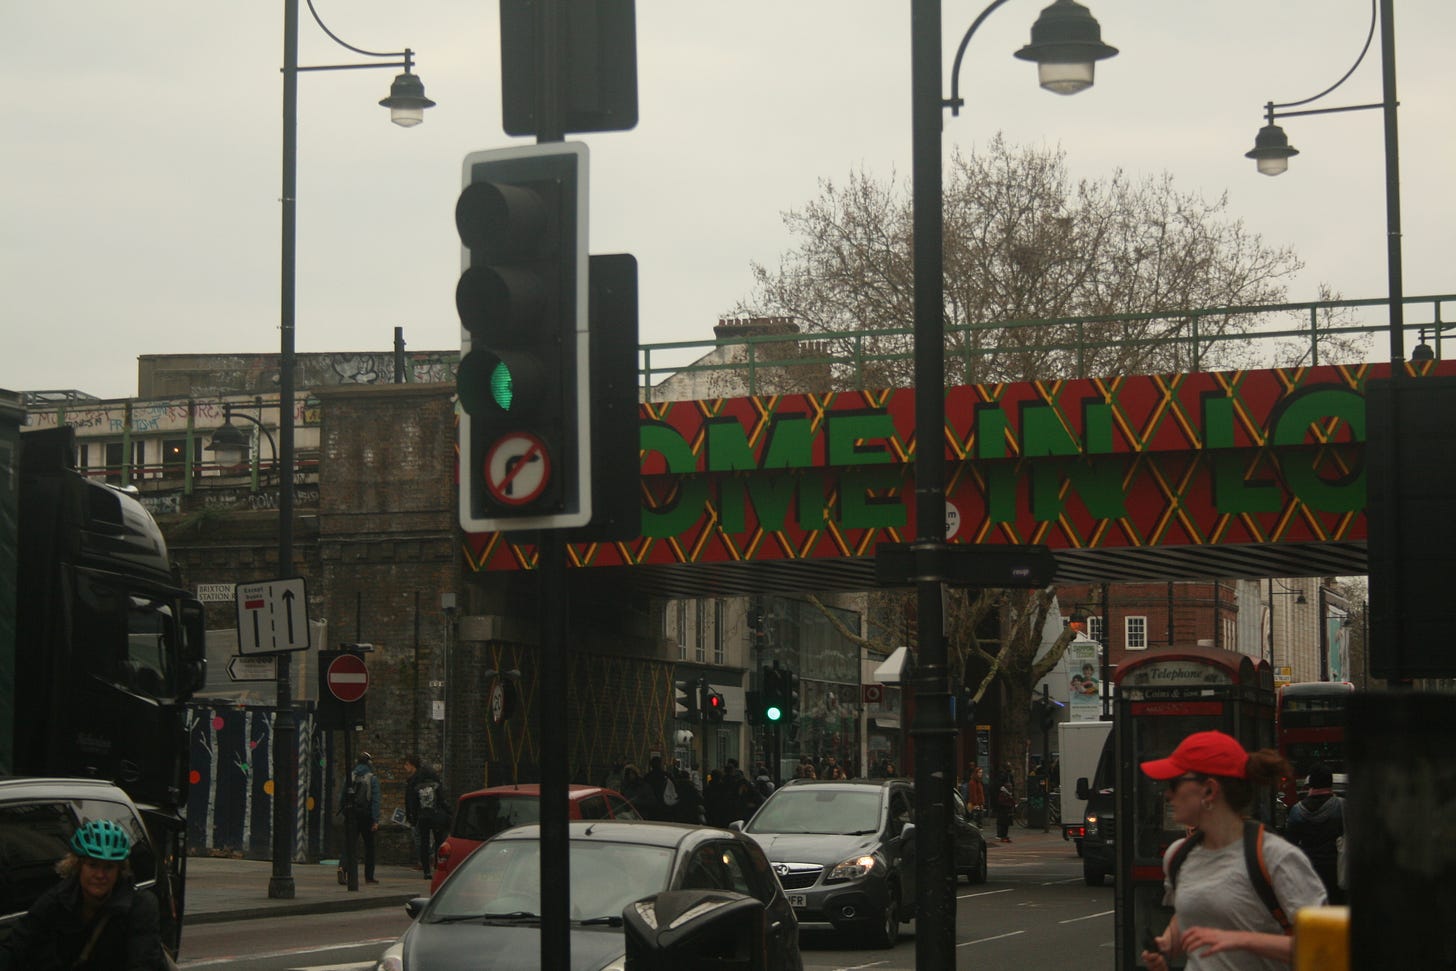 A busy road scene in Brixton